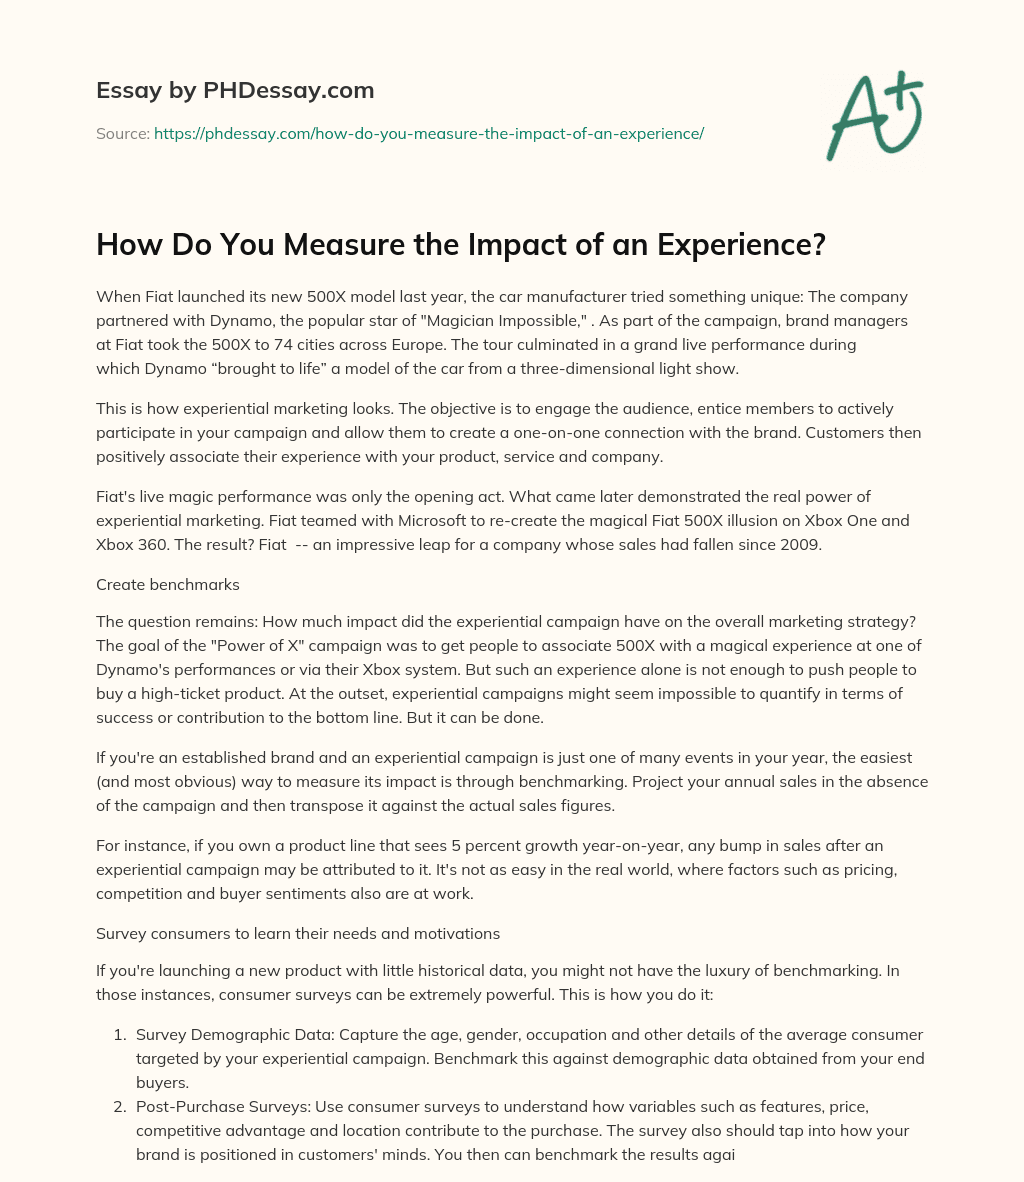 How Do You Measure the Impact of an Experience? essay